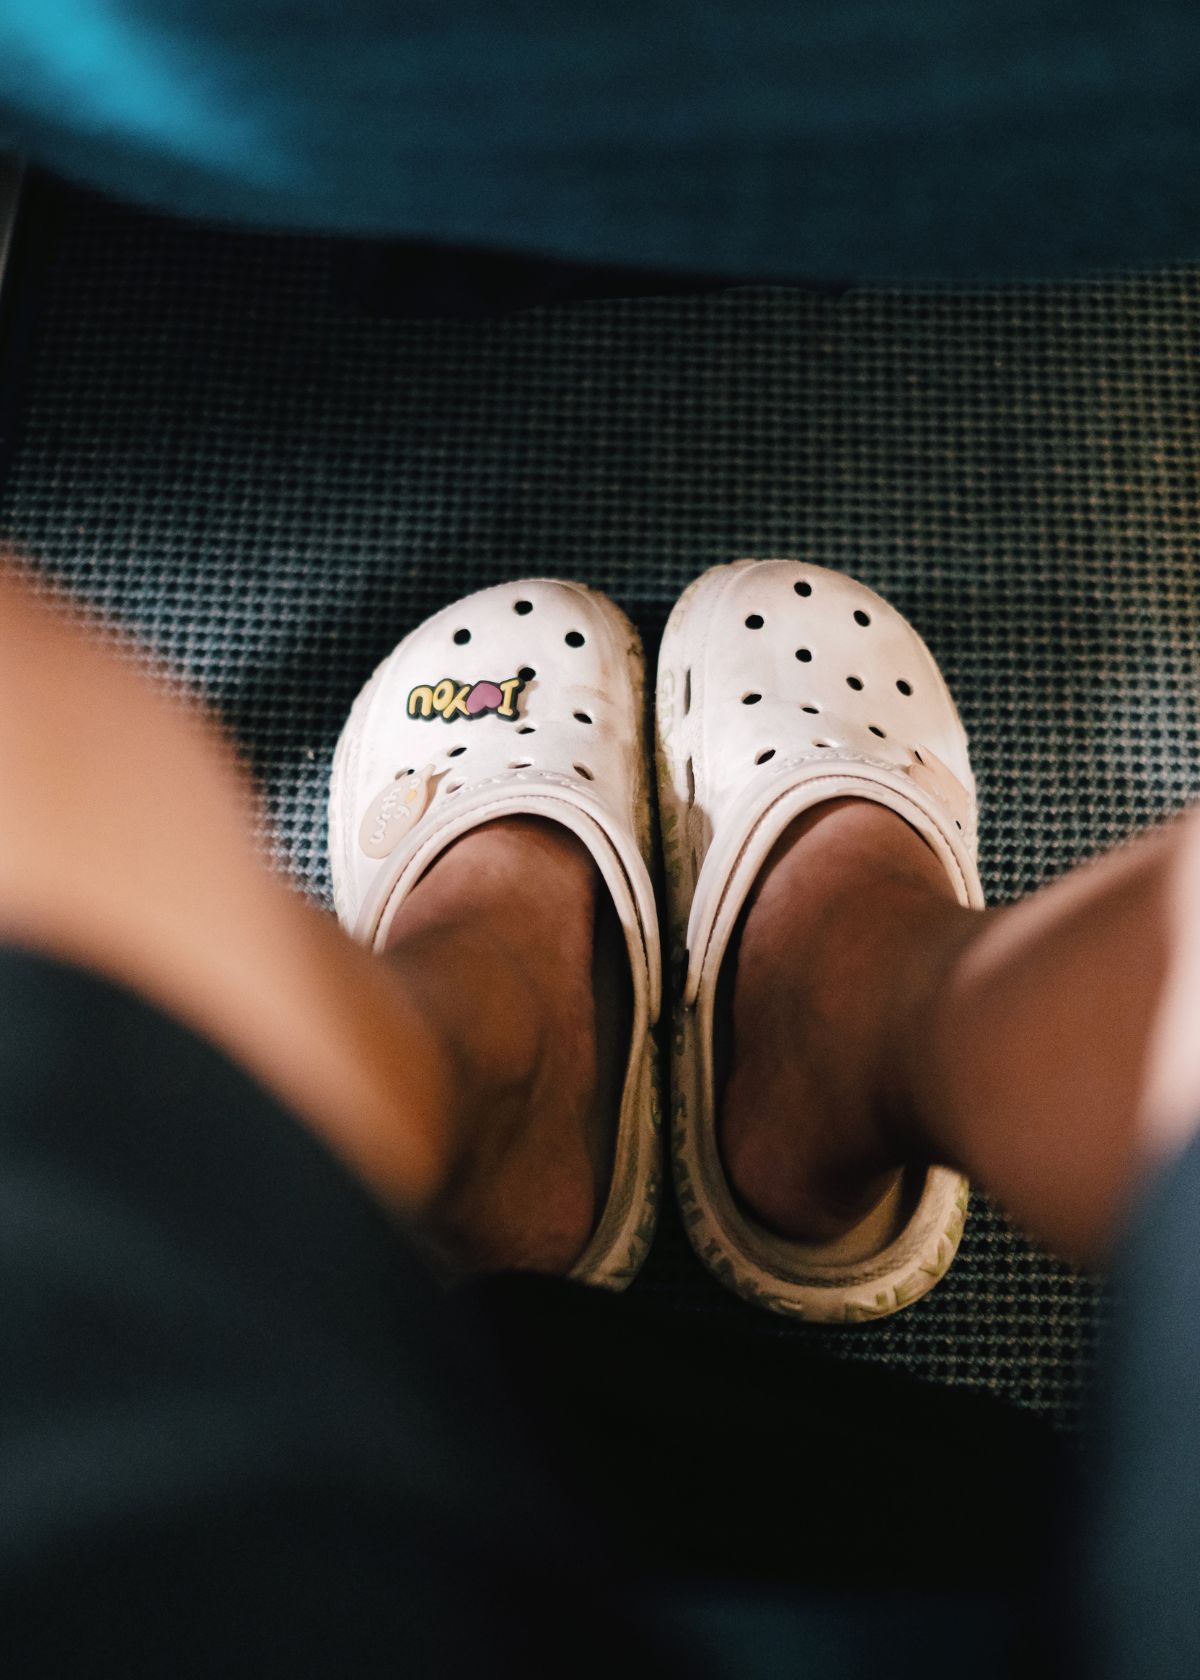 How to Clean White Crocs